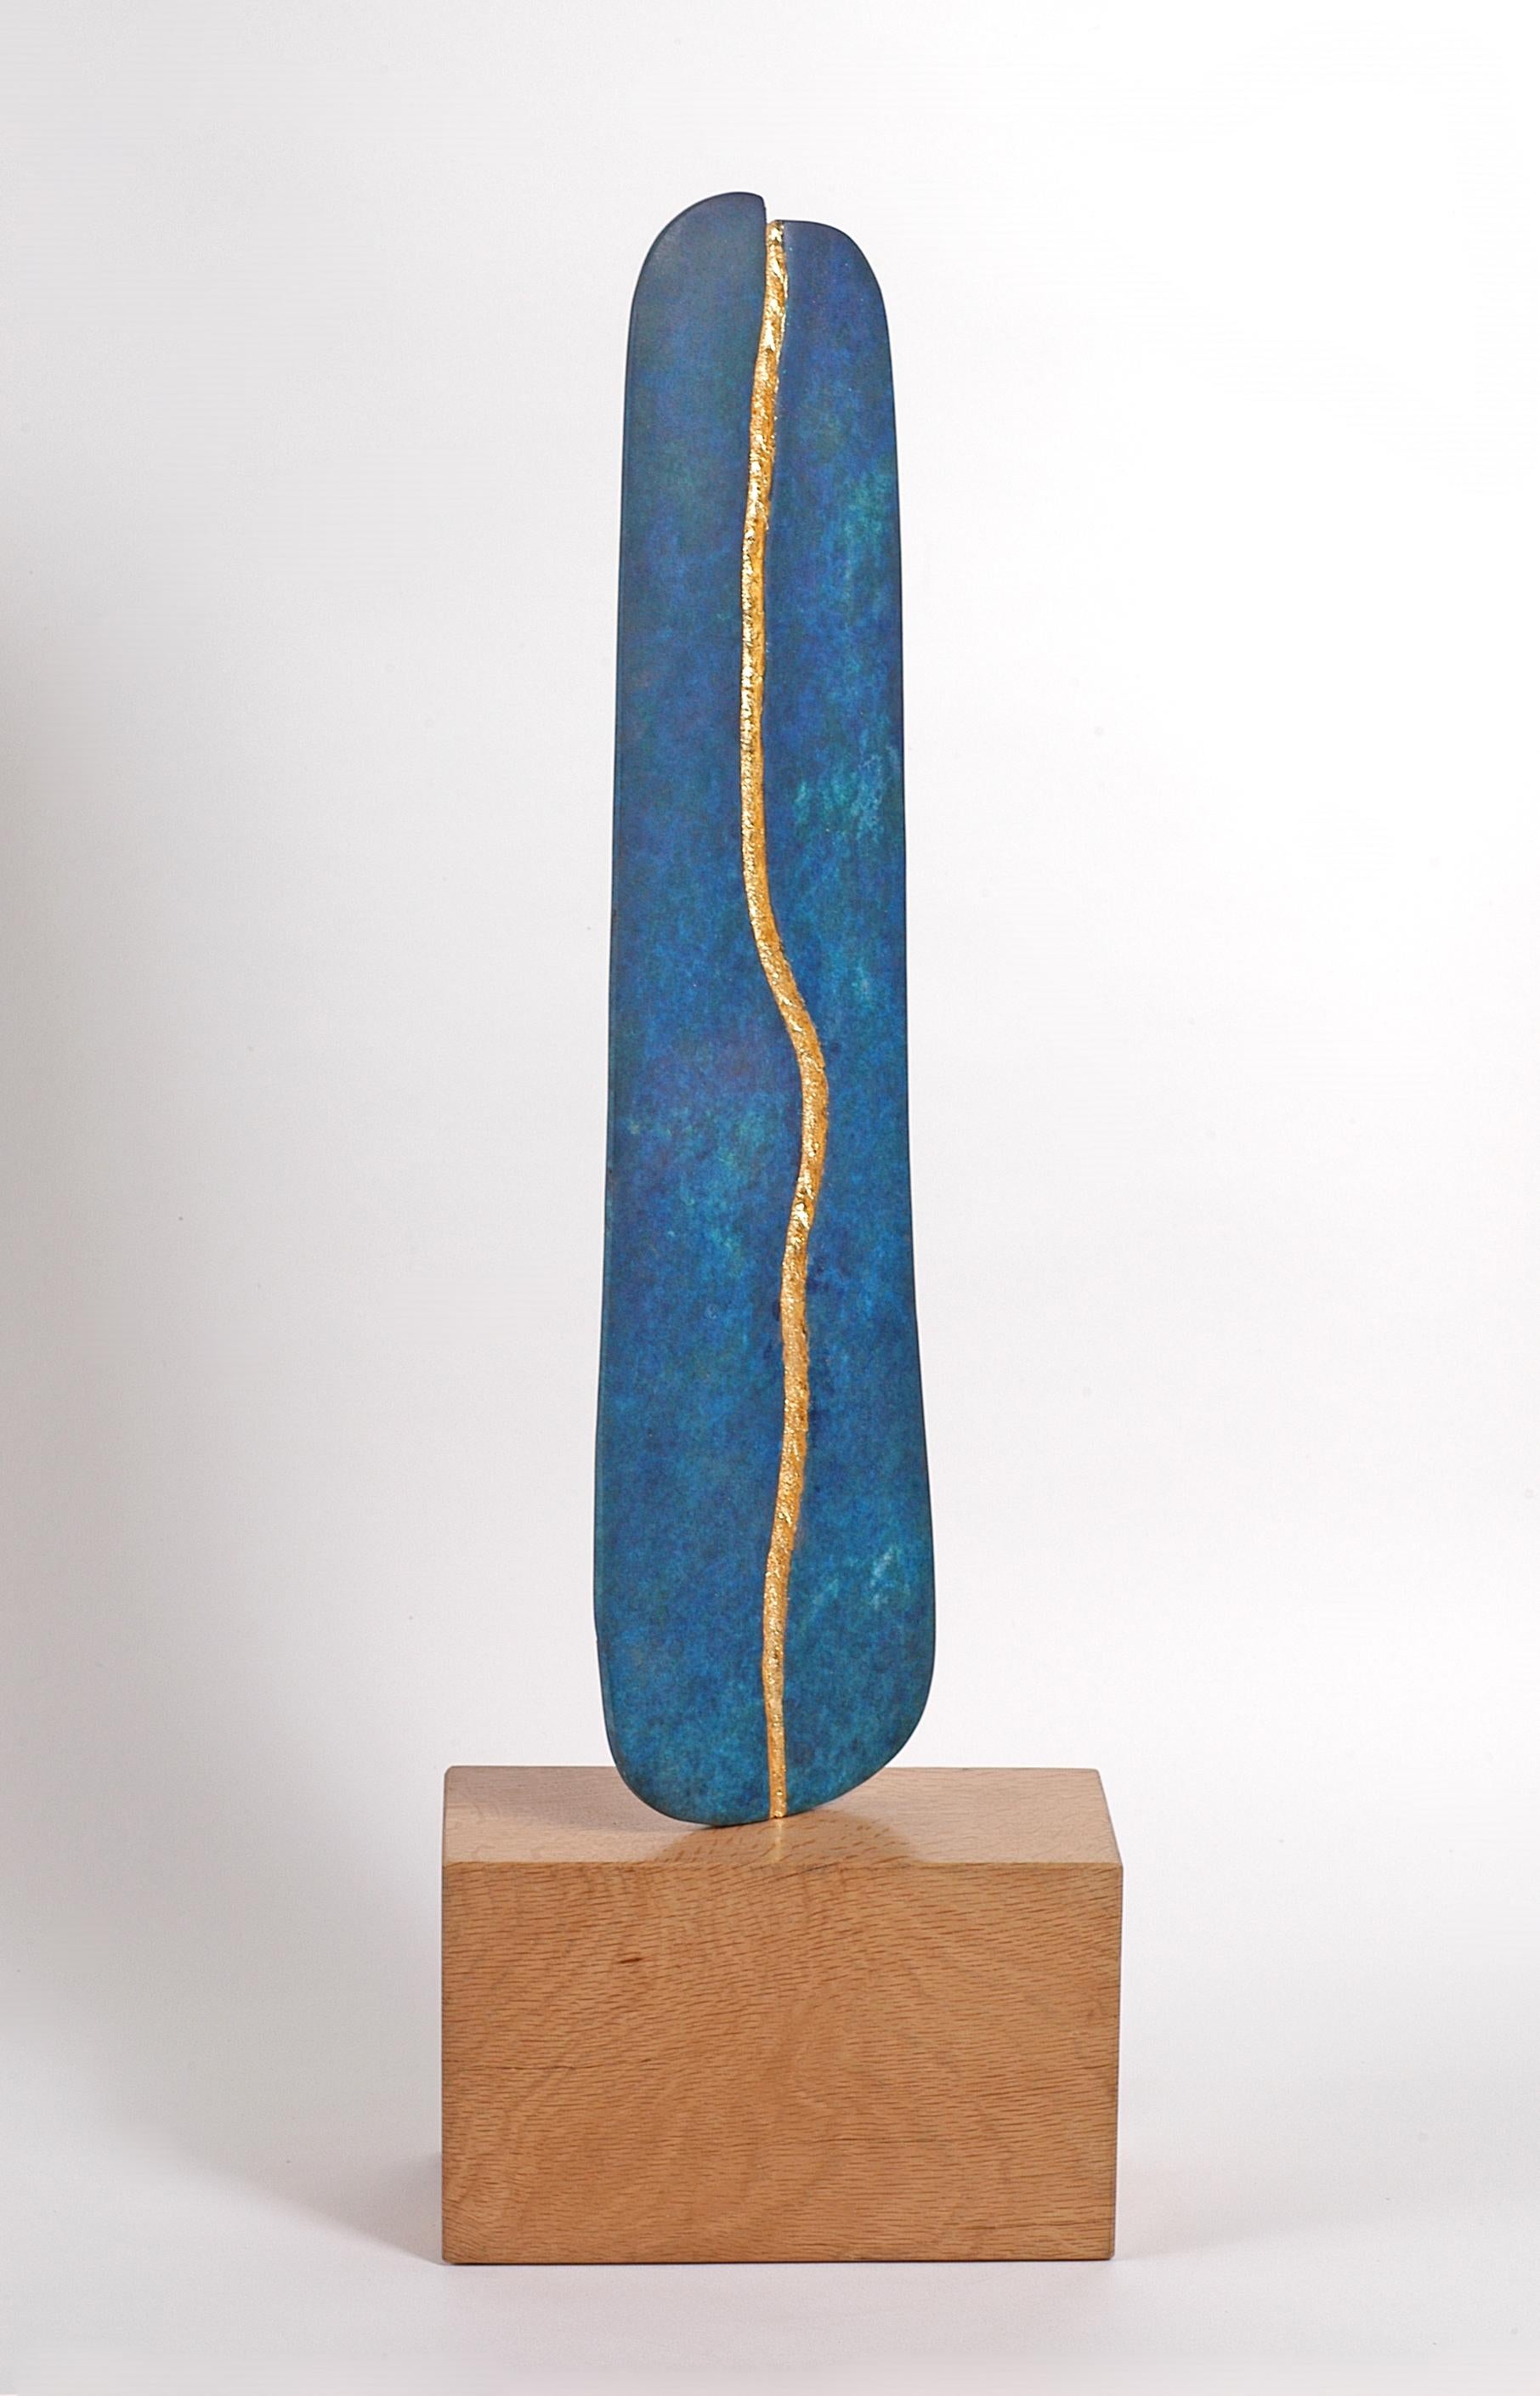 British Contemporary Sculpture by Phiip Hearsey - Strada III - Gold Abstract Sculpture by Philip Hearsey